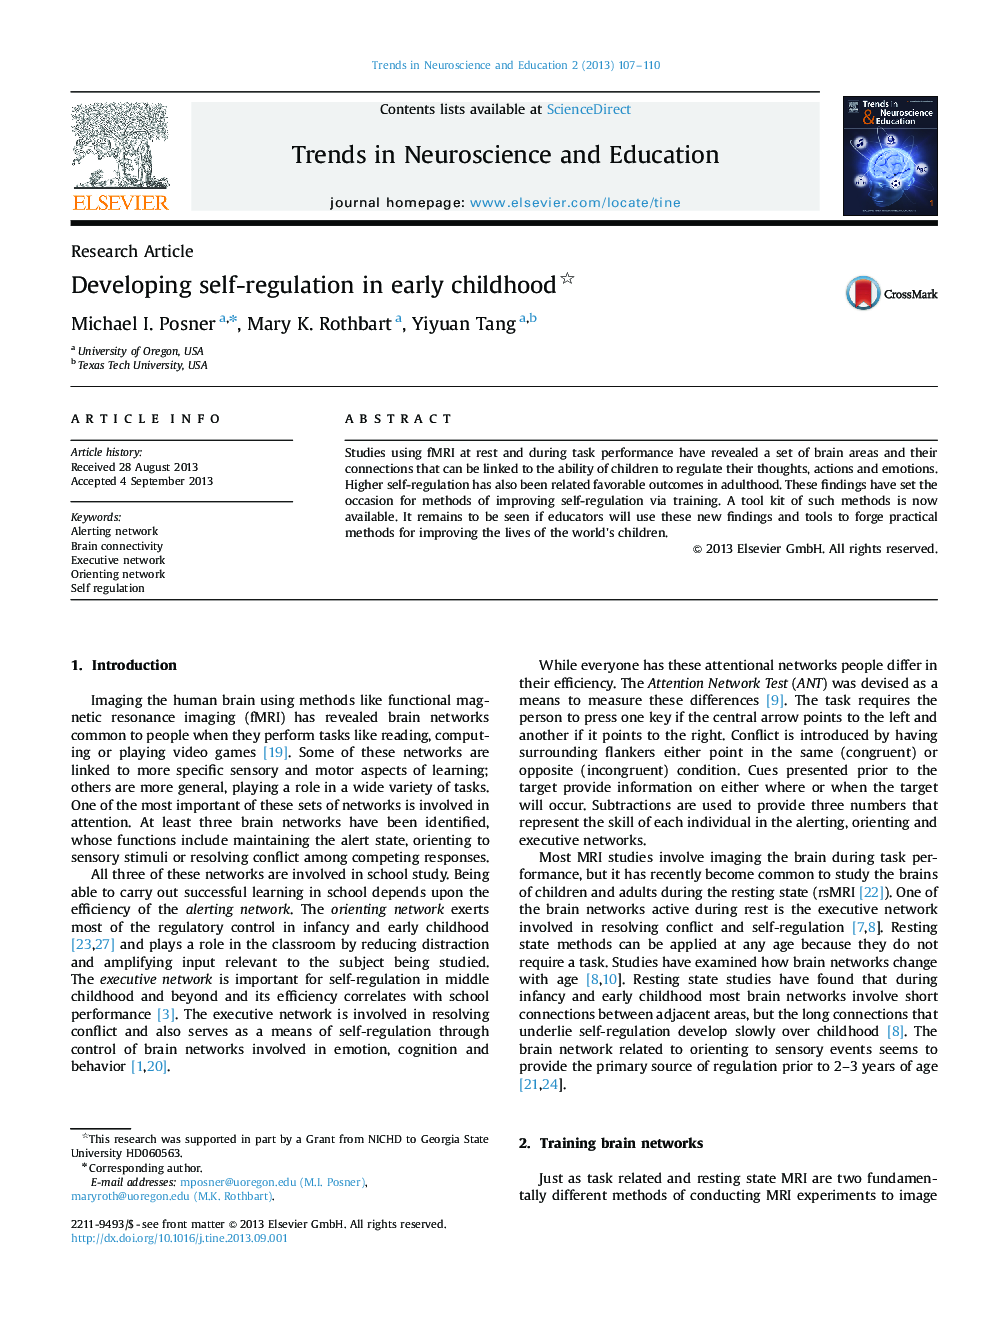 Developing self-regulation in early childhood 